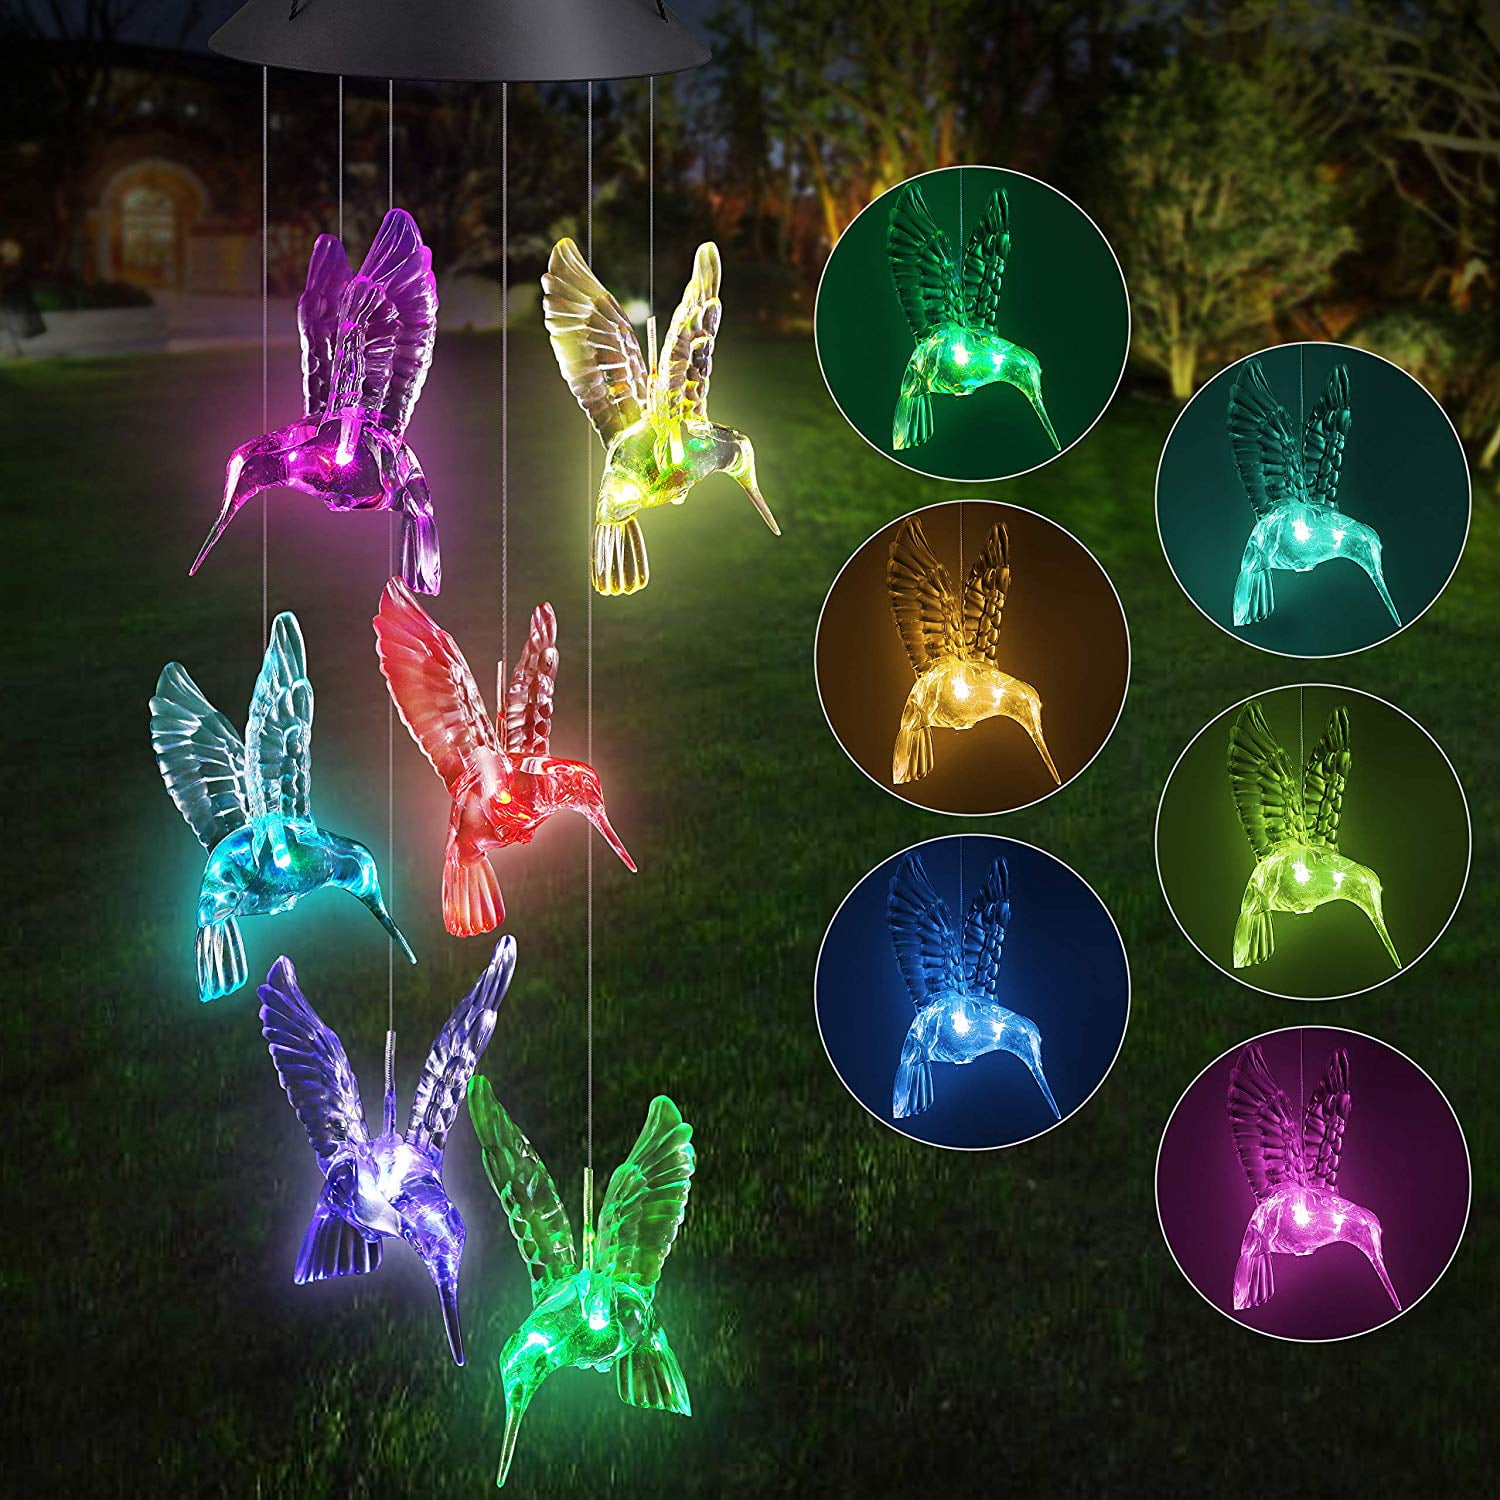 Gifts for Mom Stars Romantic Décor for Garden Yard Home Wind Chimes Outdoor with Color Changing LED Mobile Patio Lights Wife SIX FOXES Solar Powered Wind Chimes Grandma 